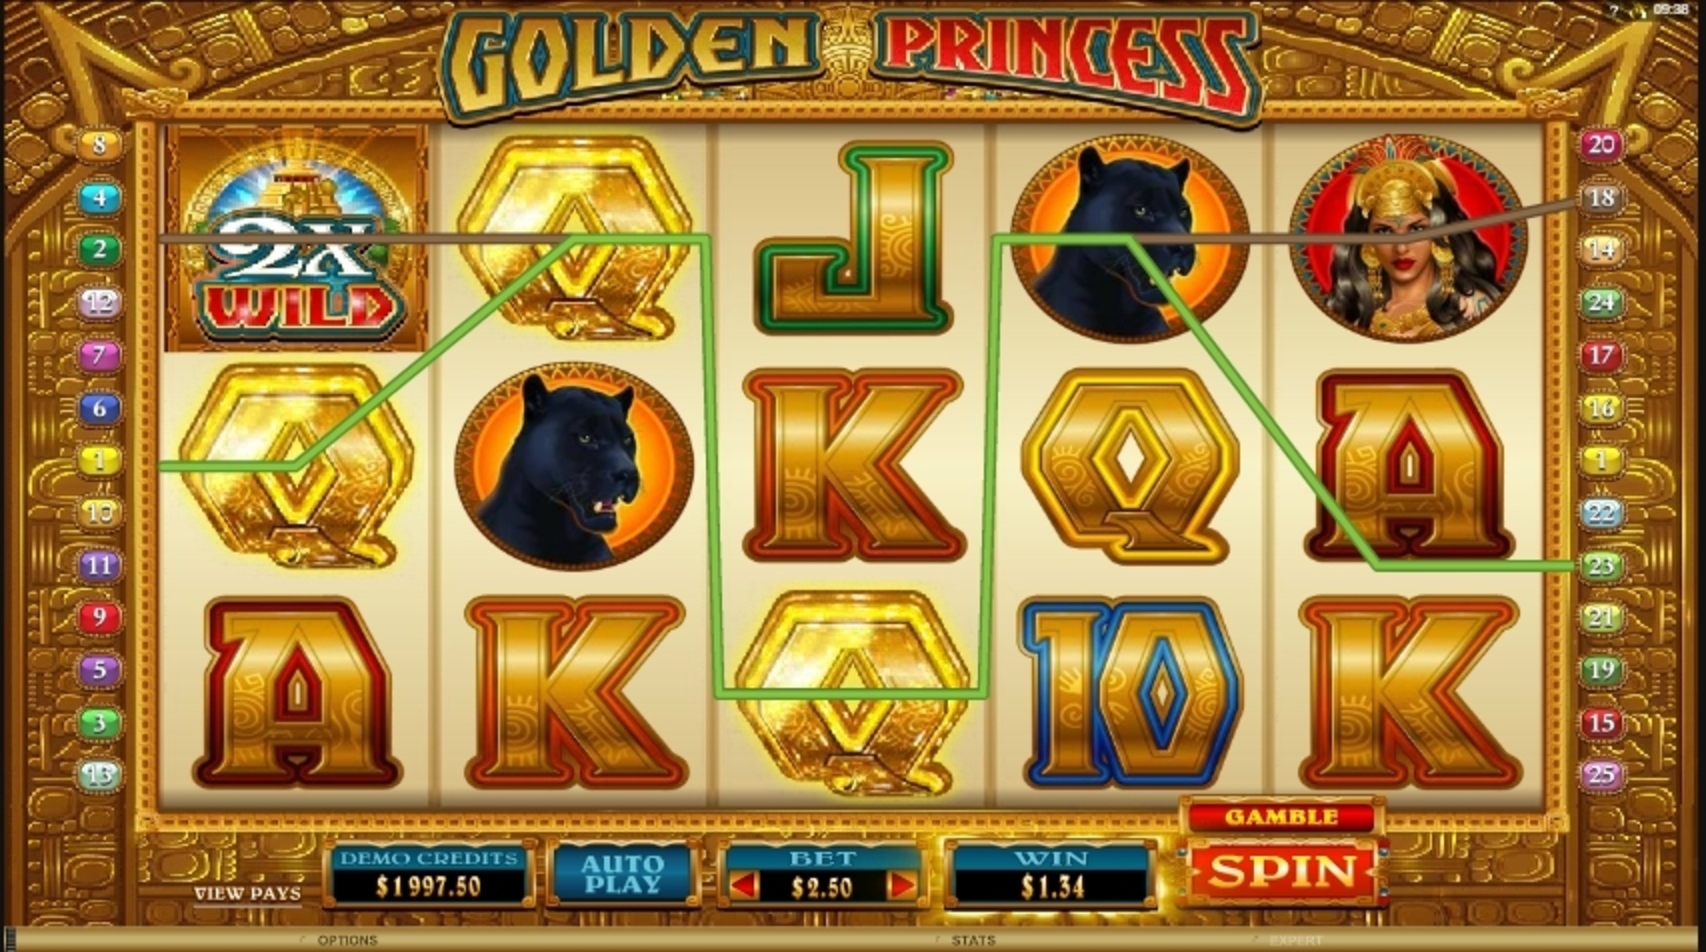 Win Money in Golden Princess Free Slot Game by Microgaming